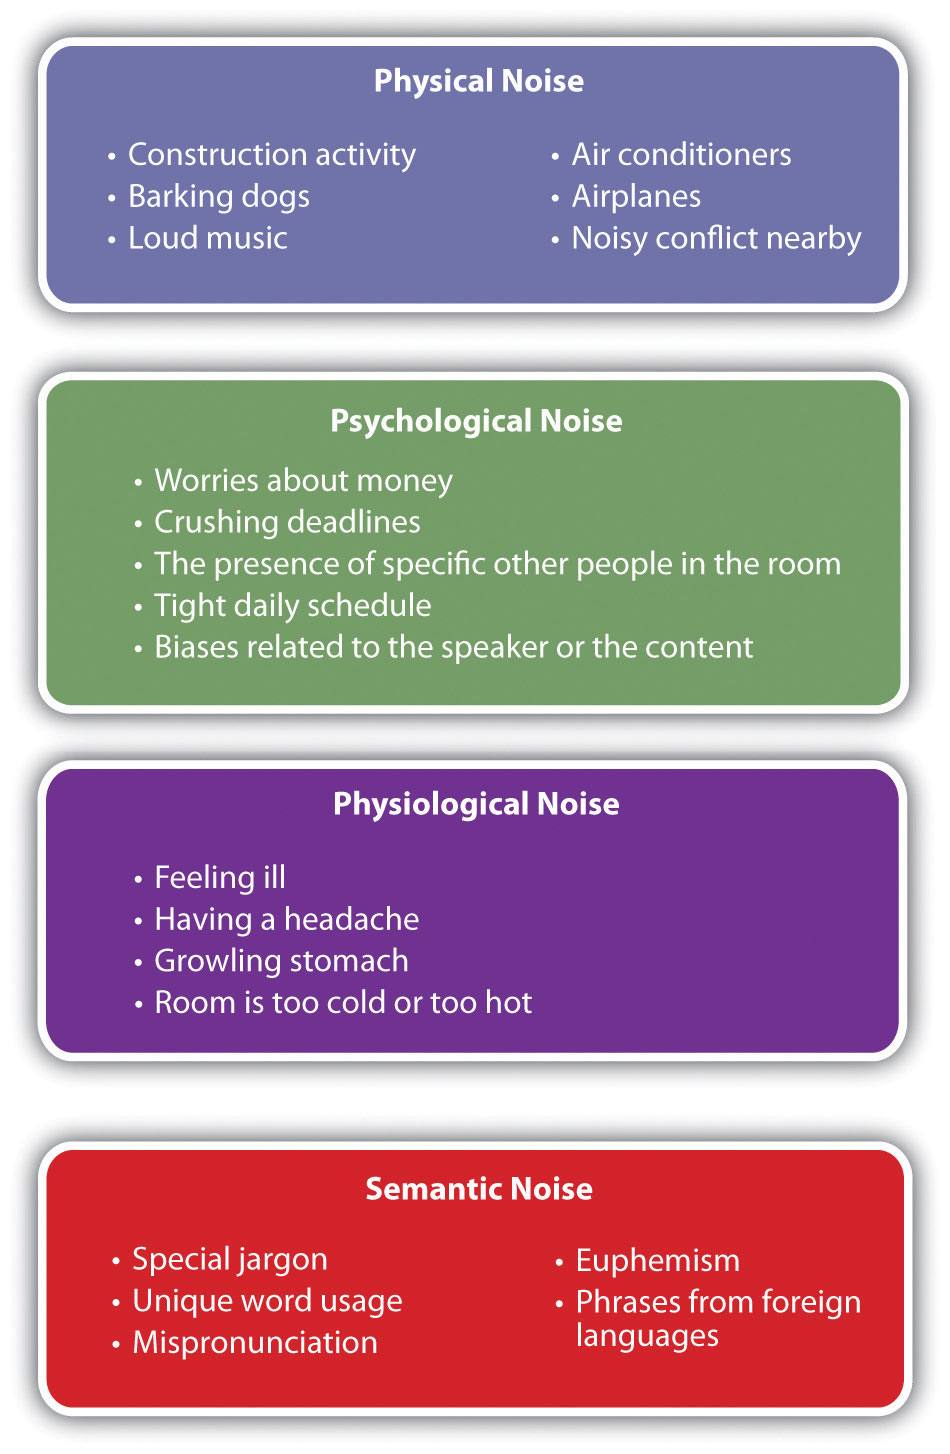 Types of Noise: Physical (Construction activity, barking dogs, loud music, air conditioners, airplanes, noisy conflict nearby), Psychological (Worries about money, crushing deadlines, the presence of specific other people in the room, tight daily schedule, biases related to the speaker or the content), Physiological (Feeling ill, having a headache, growling stomach, room is too cold or too hot), and Semantic (Special jargon, unique word usage, mispronunciation, euphemism, phrases from foreign languages)